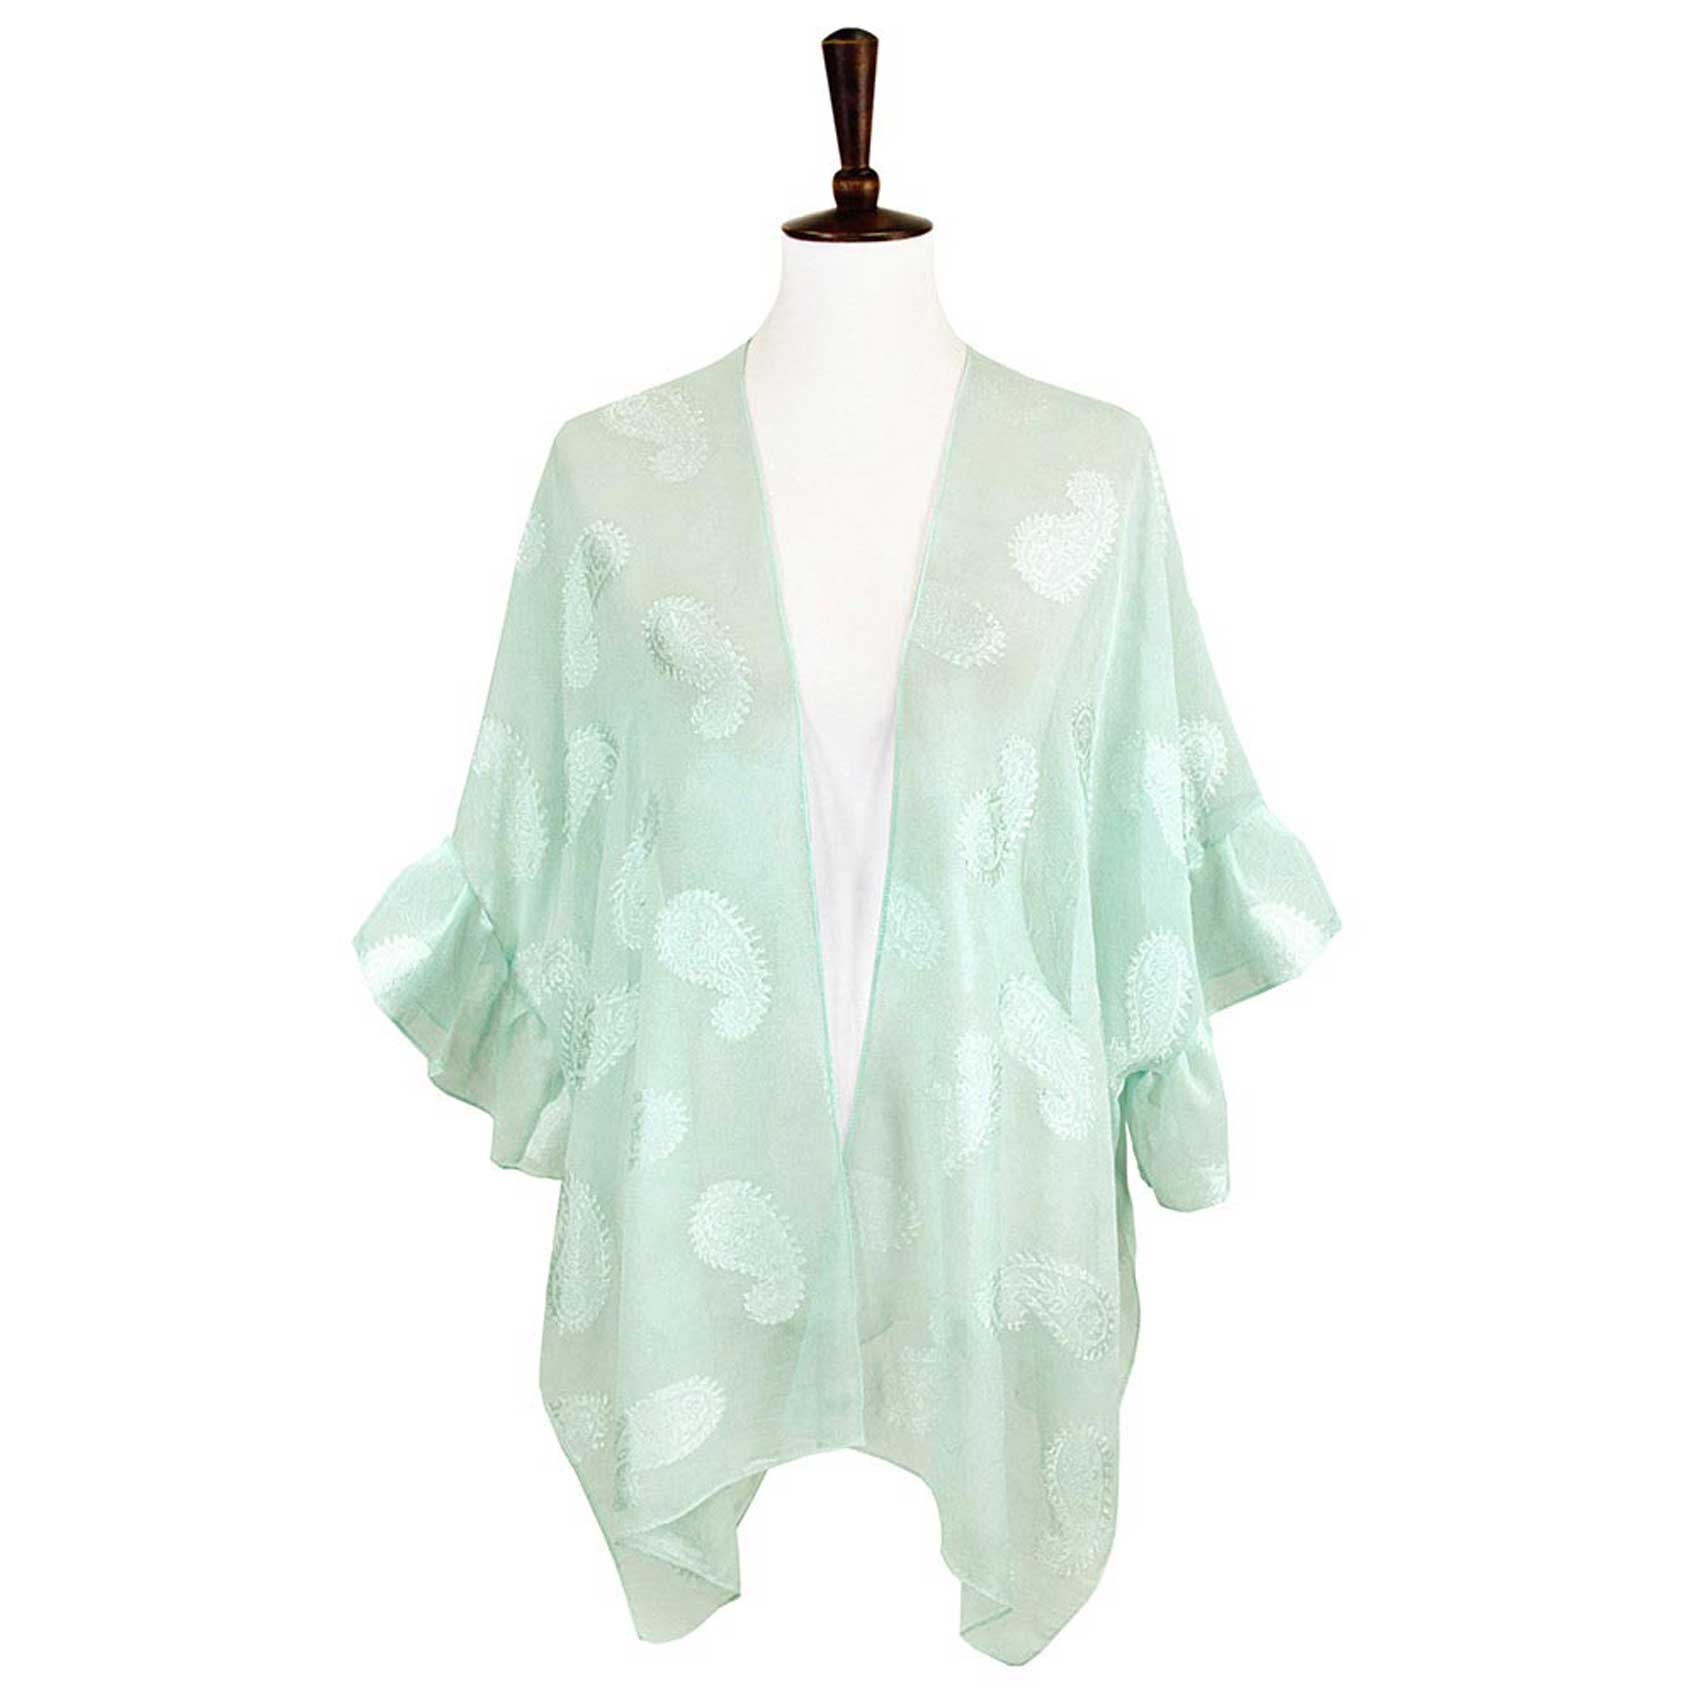 Mint Paisley Patterned Sheer Ruffle Sleeves Cover Up Kimono Poncho, The lightweight Kimono poncho top is made of soft and breathable Polyester material. short sleeve swimsuit cover up with open front design, simple basic style, easy to put on and down. Perfect Gift for Wife, Mom, Birthday, Holiday, Anniversary, Fun Night O